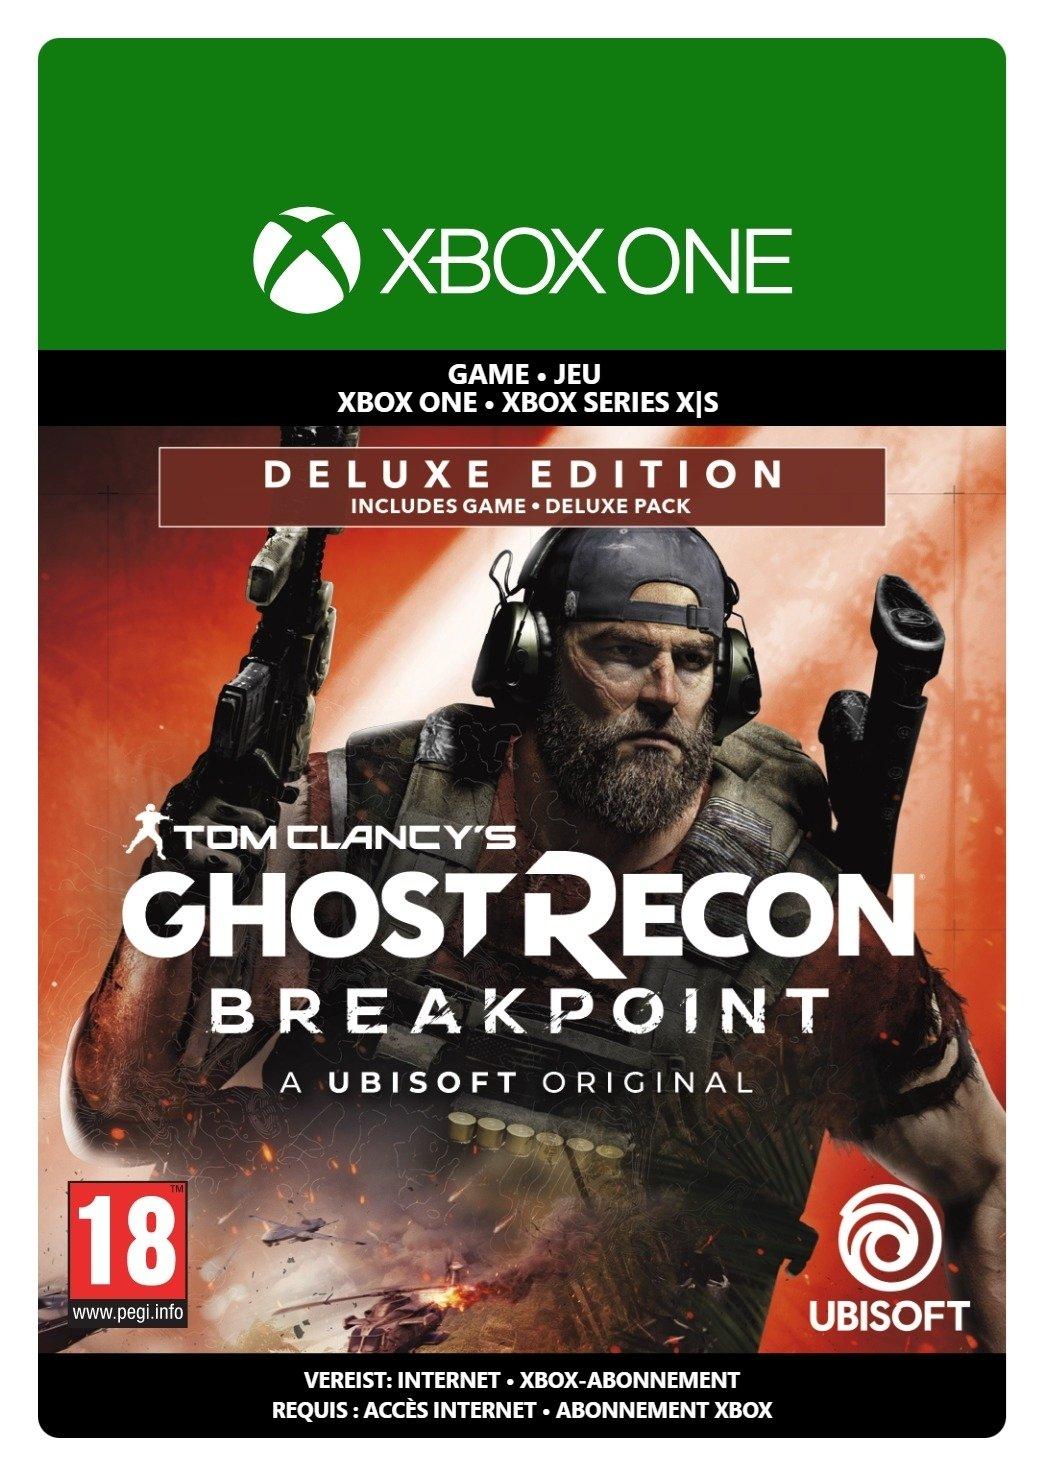 Tom Clancy's Ghost Recon Breakpoint Deluxe Edition - Xbox One/Plays on Xbox Series X - Game | G3Q-01270 (3a185306-d910-0d43-ac7b-03c4f01b01c1)